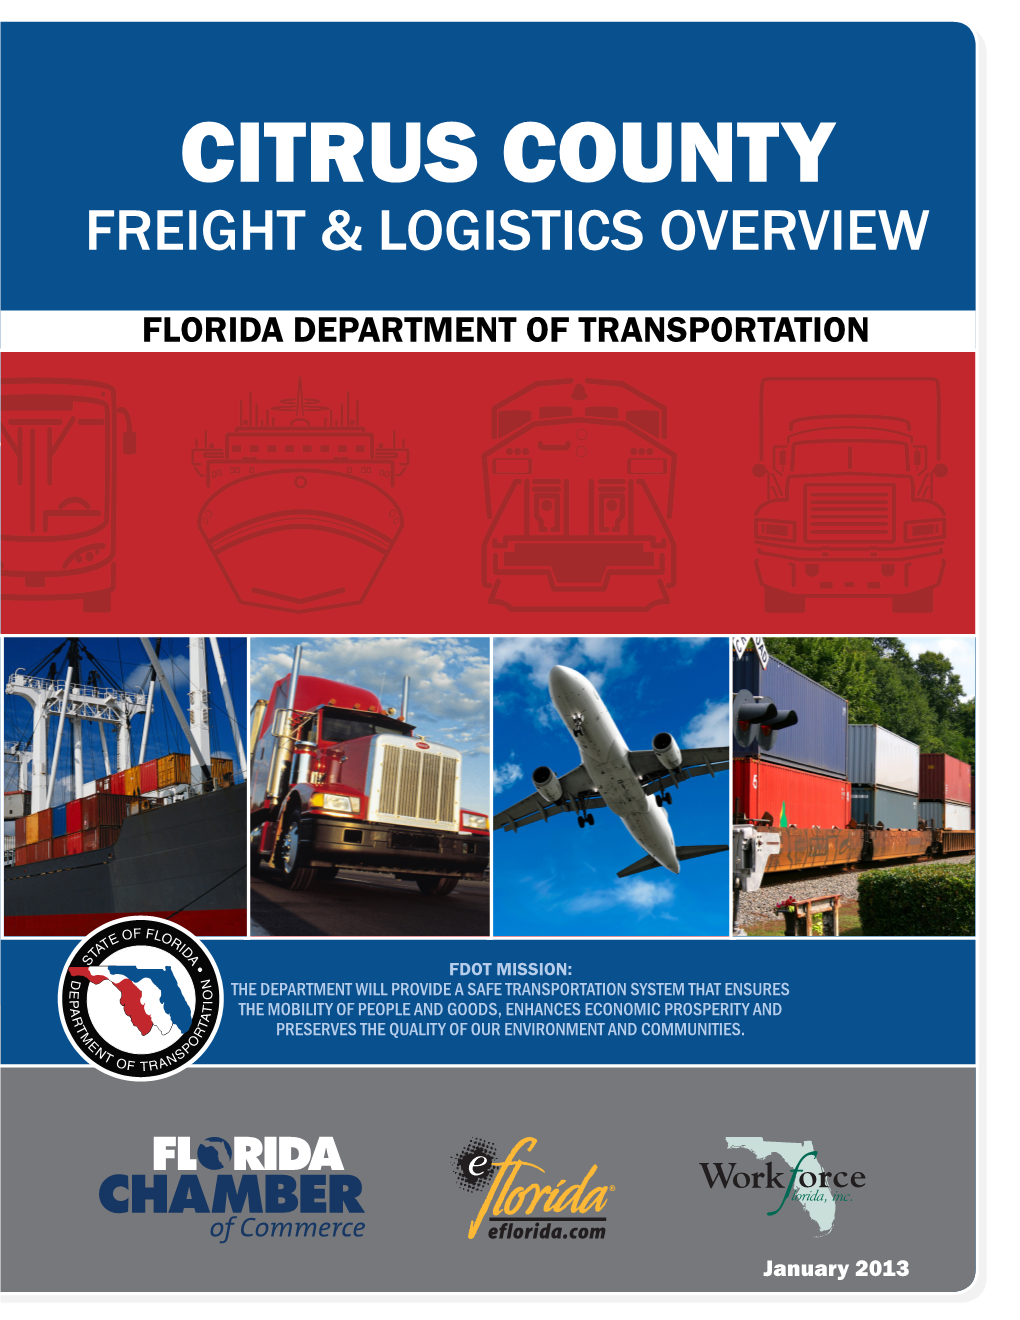 Citrus County Freight & Logistics Overview